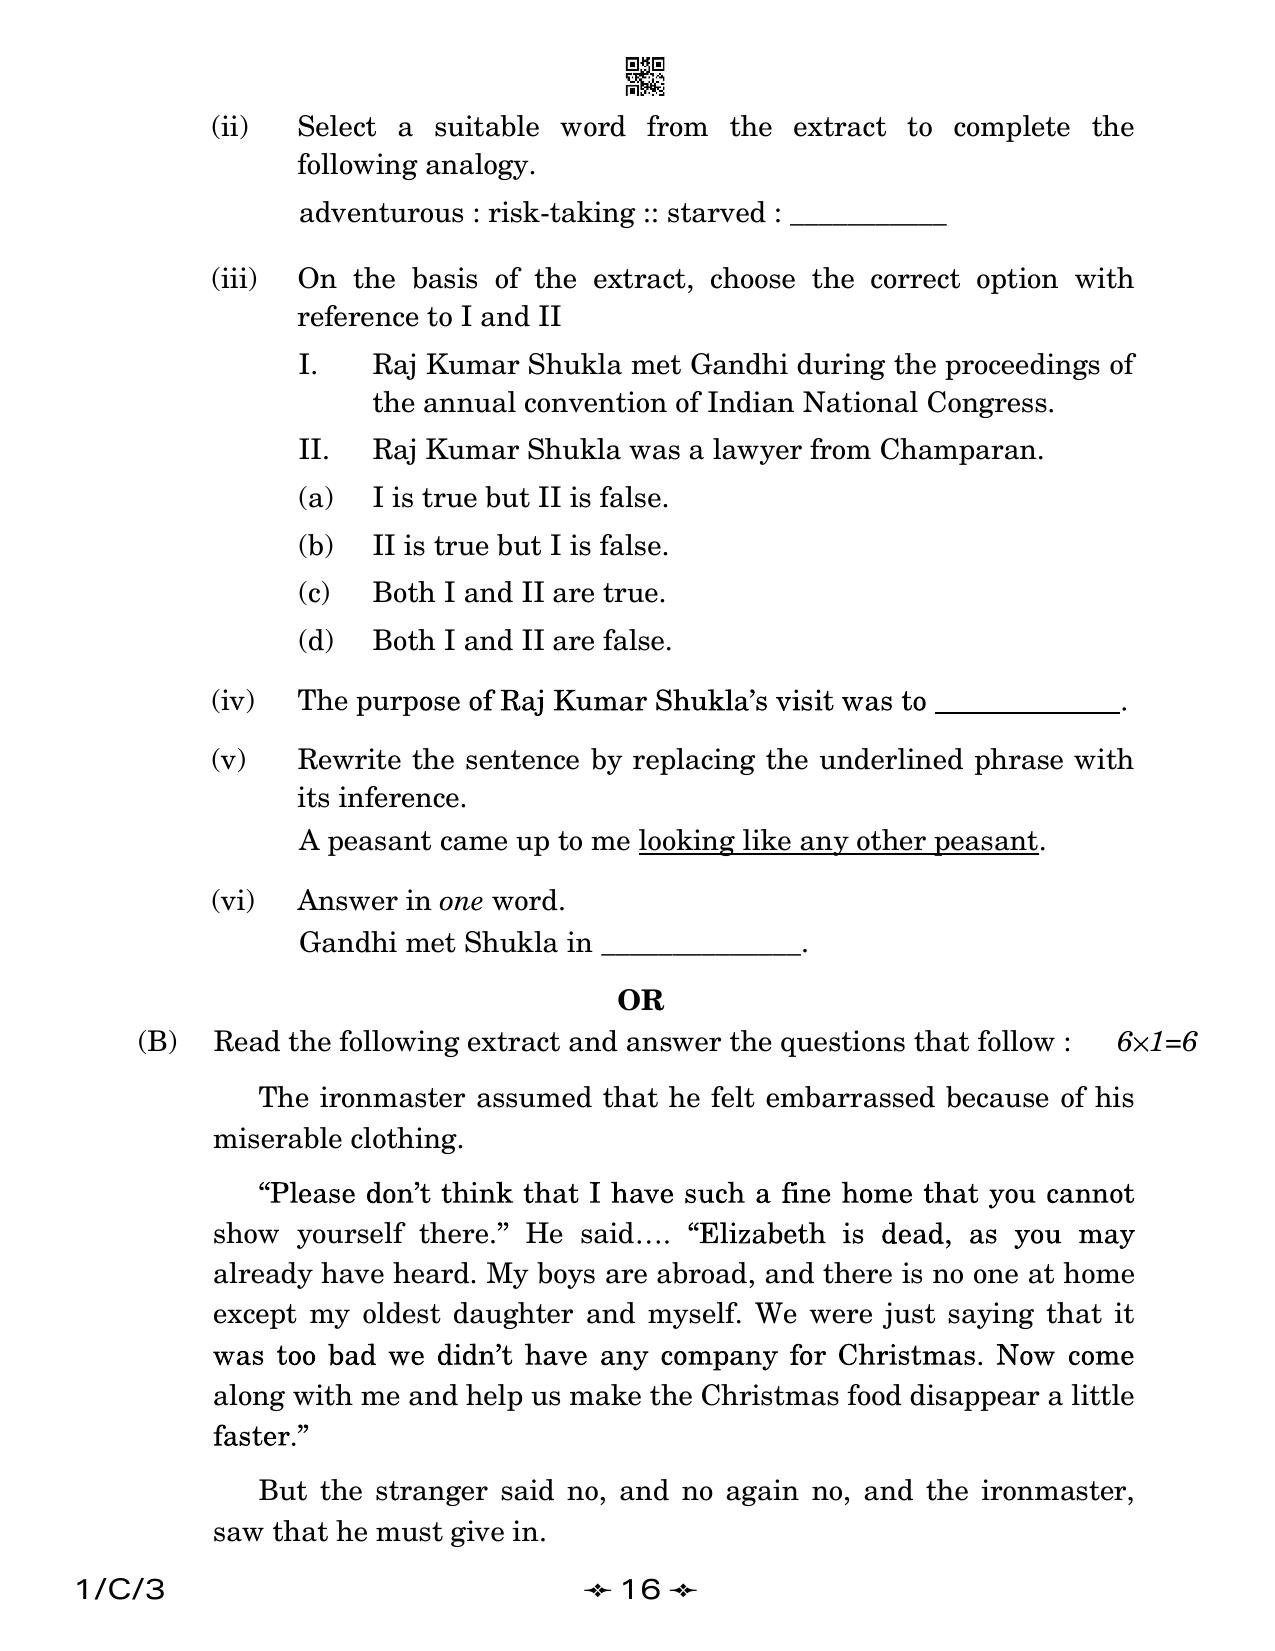 CBSE Class 12 1-3 English Core 2023 (Compartment) Question Paper - Page 16